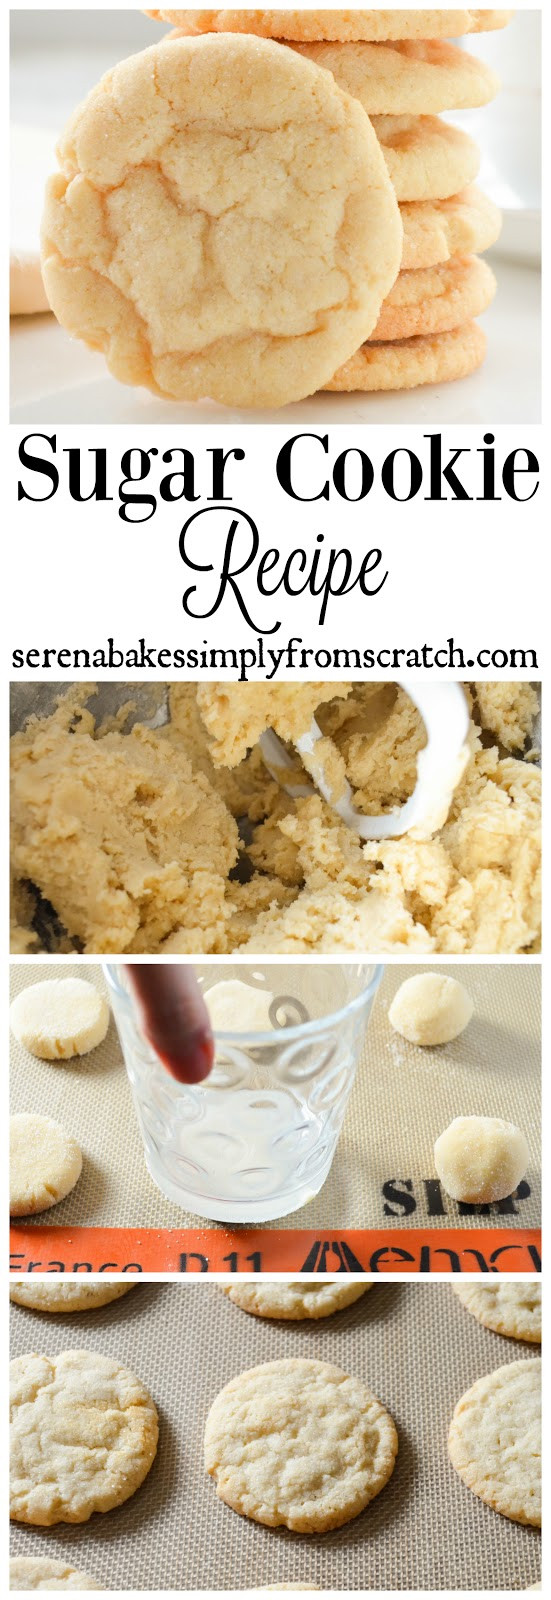 Christmas Cookies Recipes From Scratch
 Sugar Cookie Recipe Serena Bakes Simply From Scratch